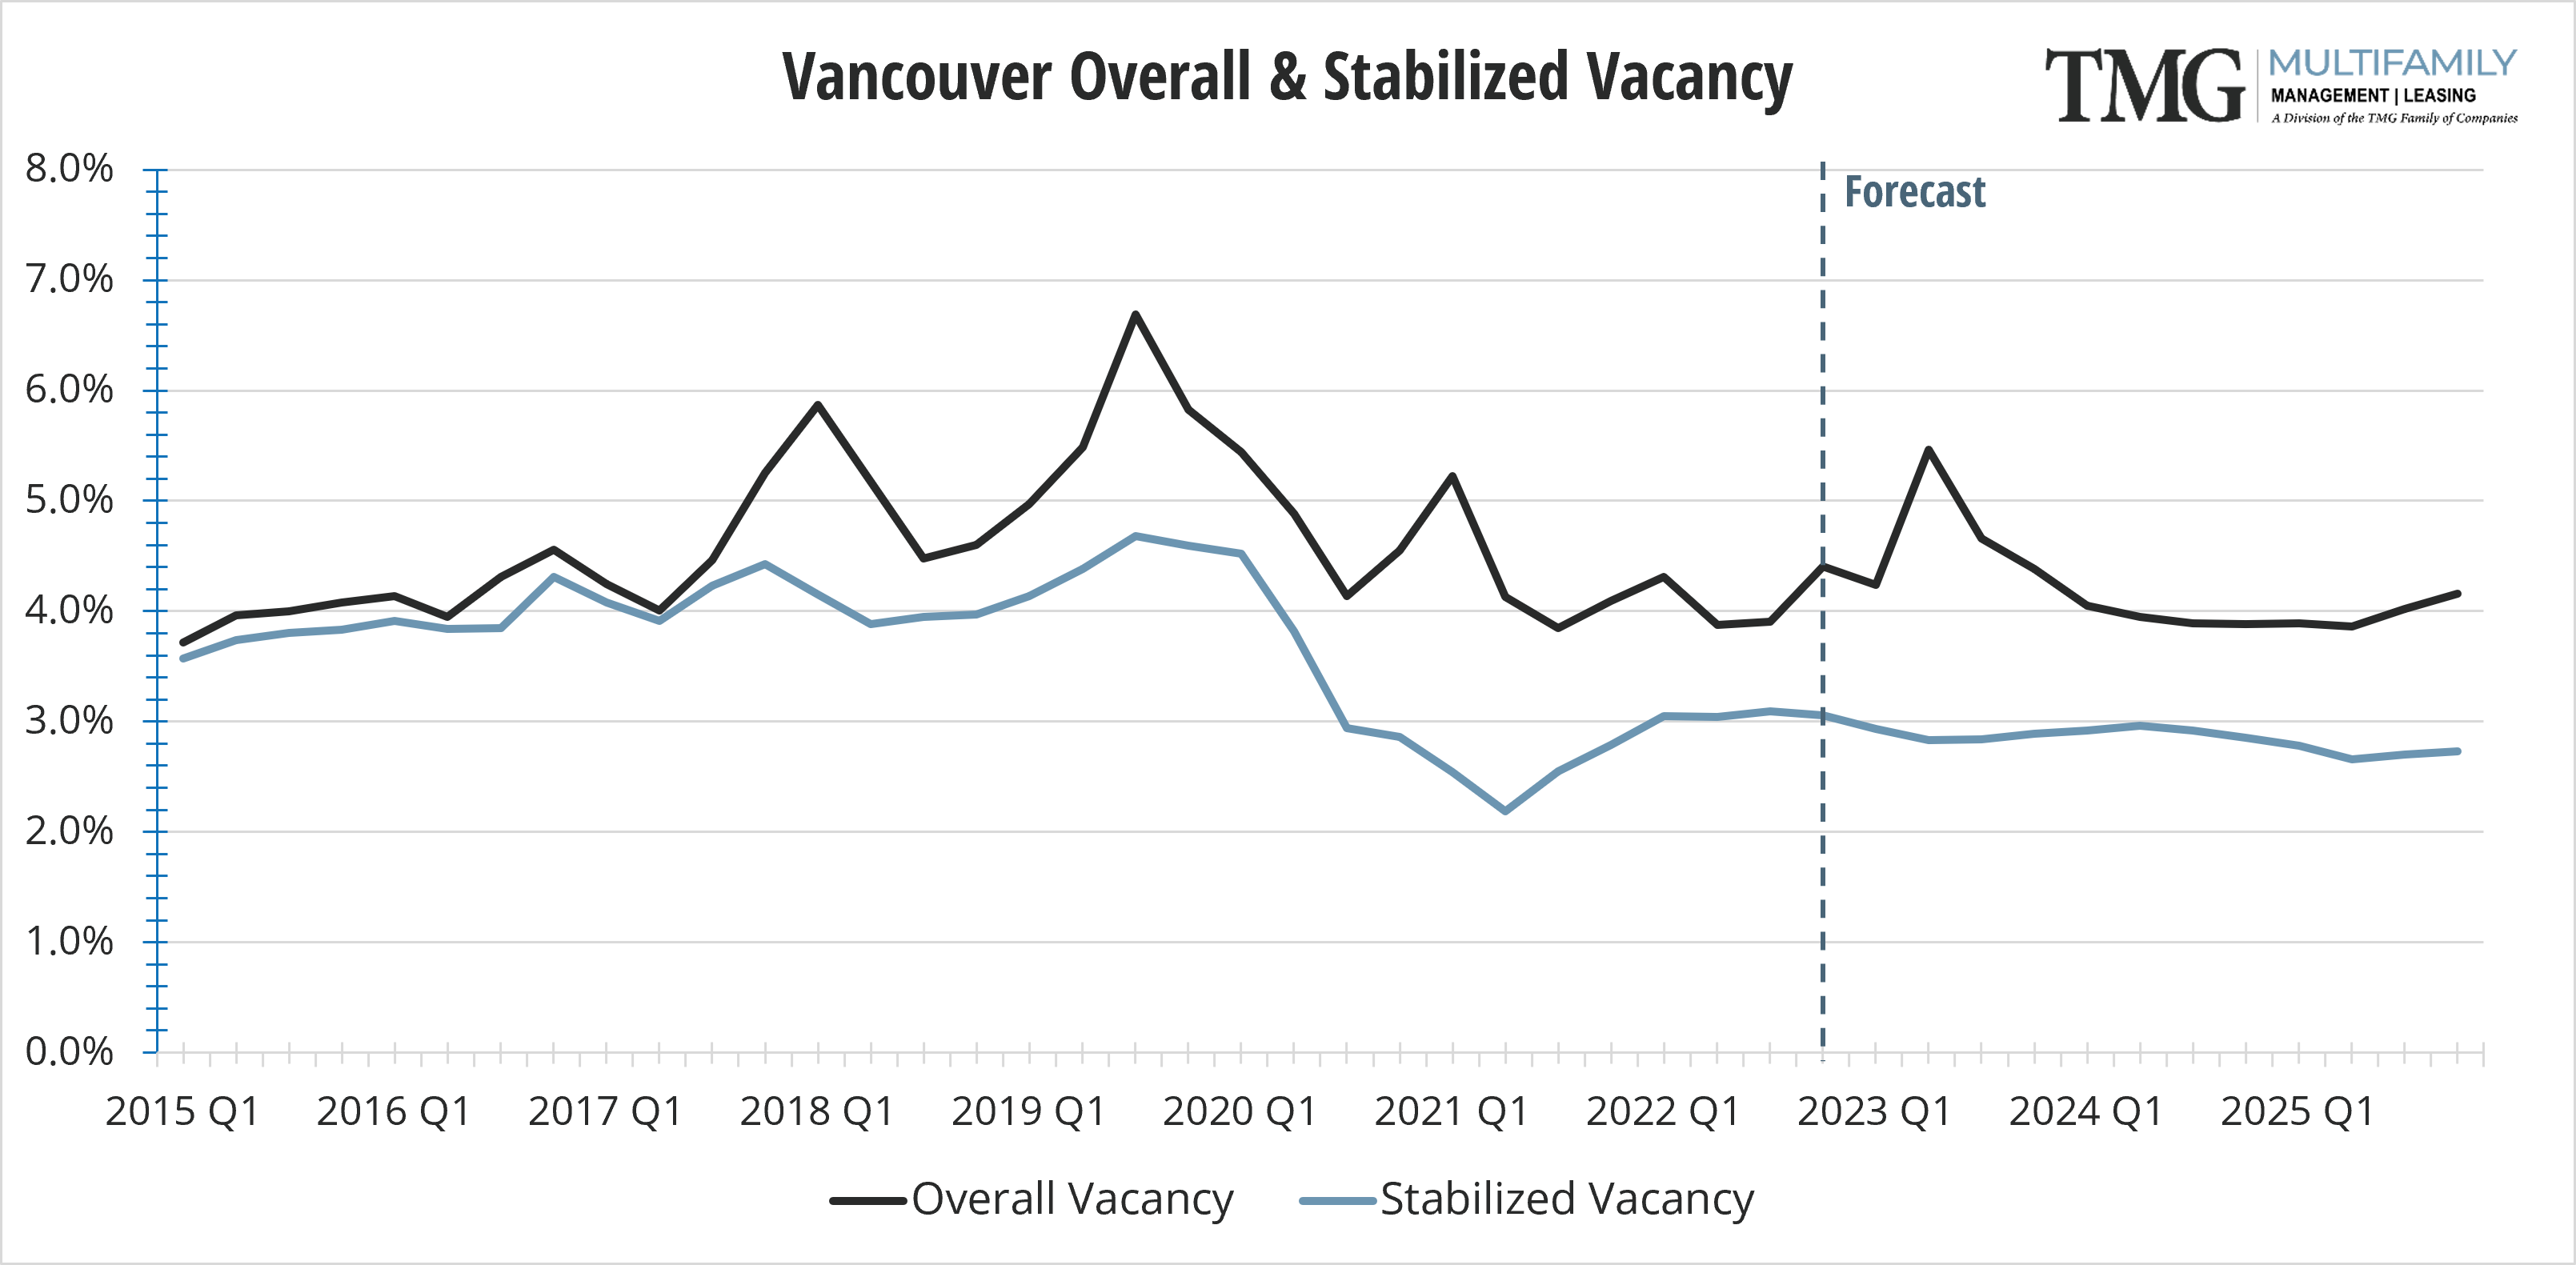 Vancouver Overall & Stabilized Vacancy